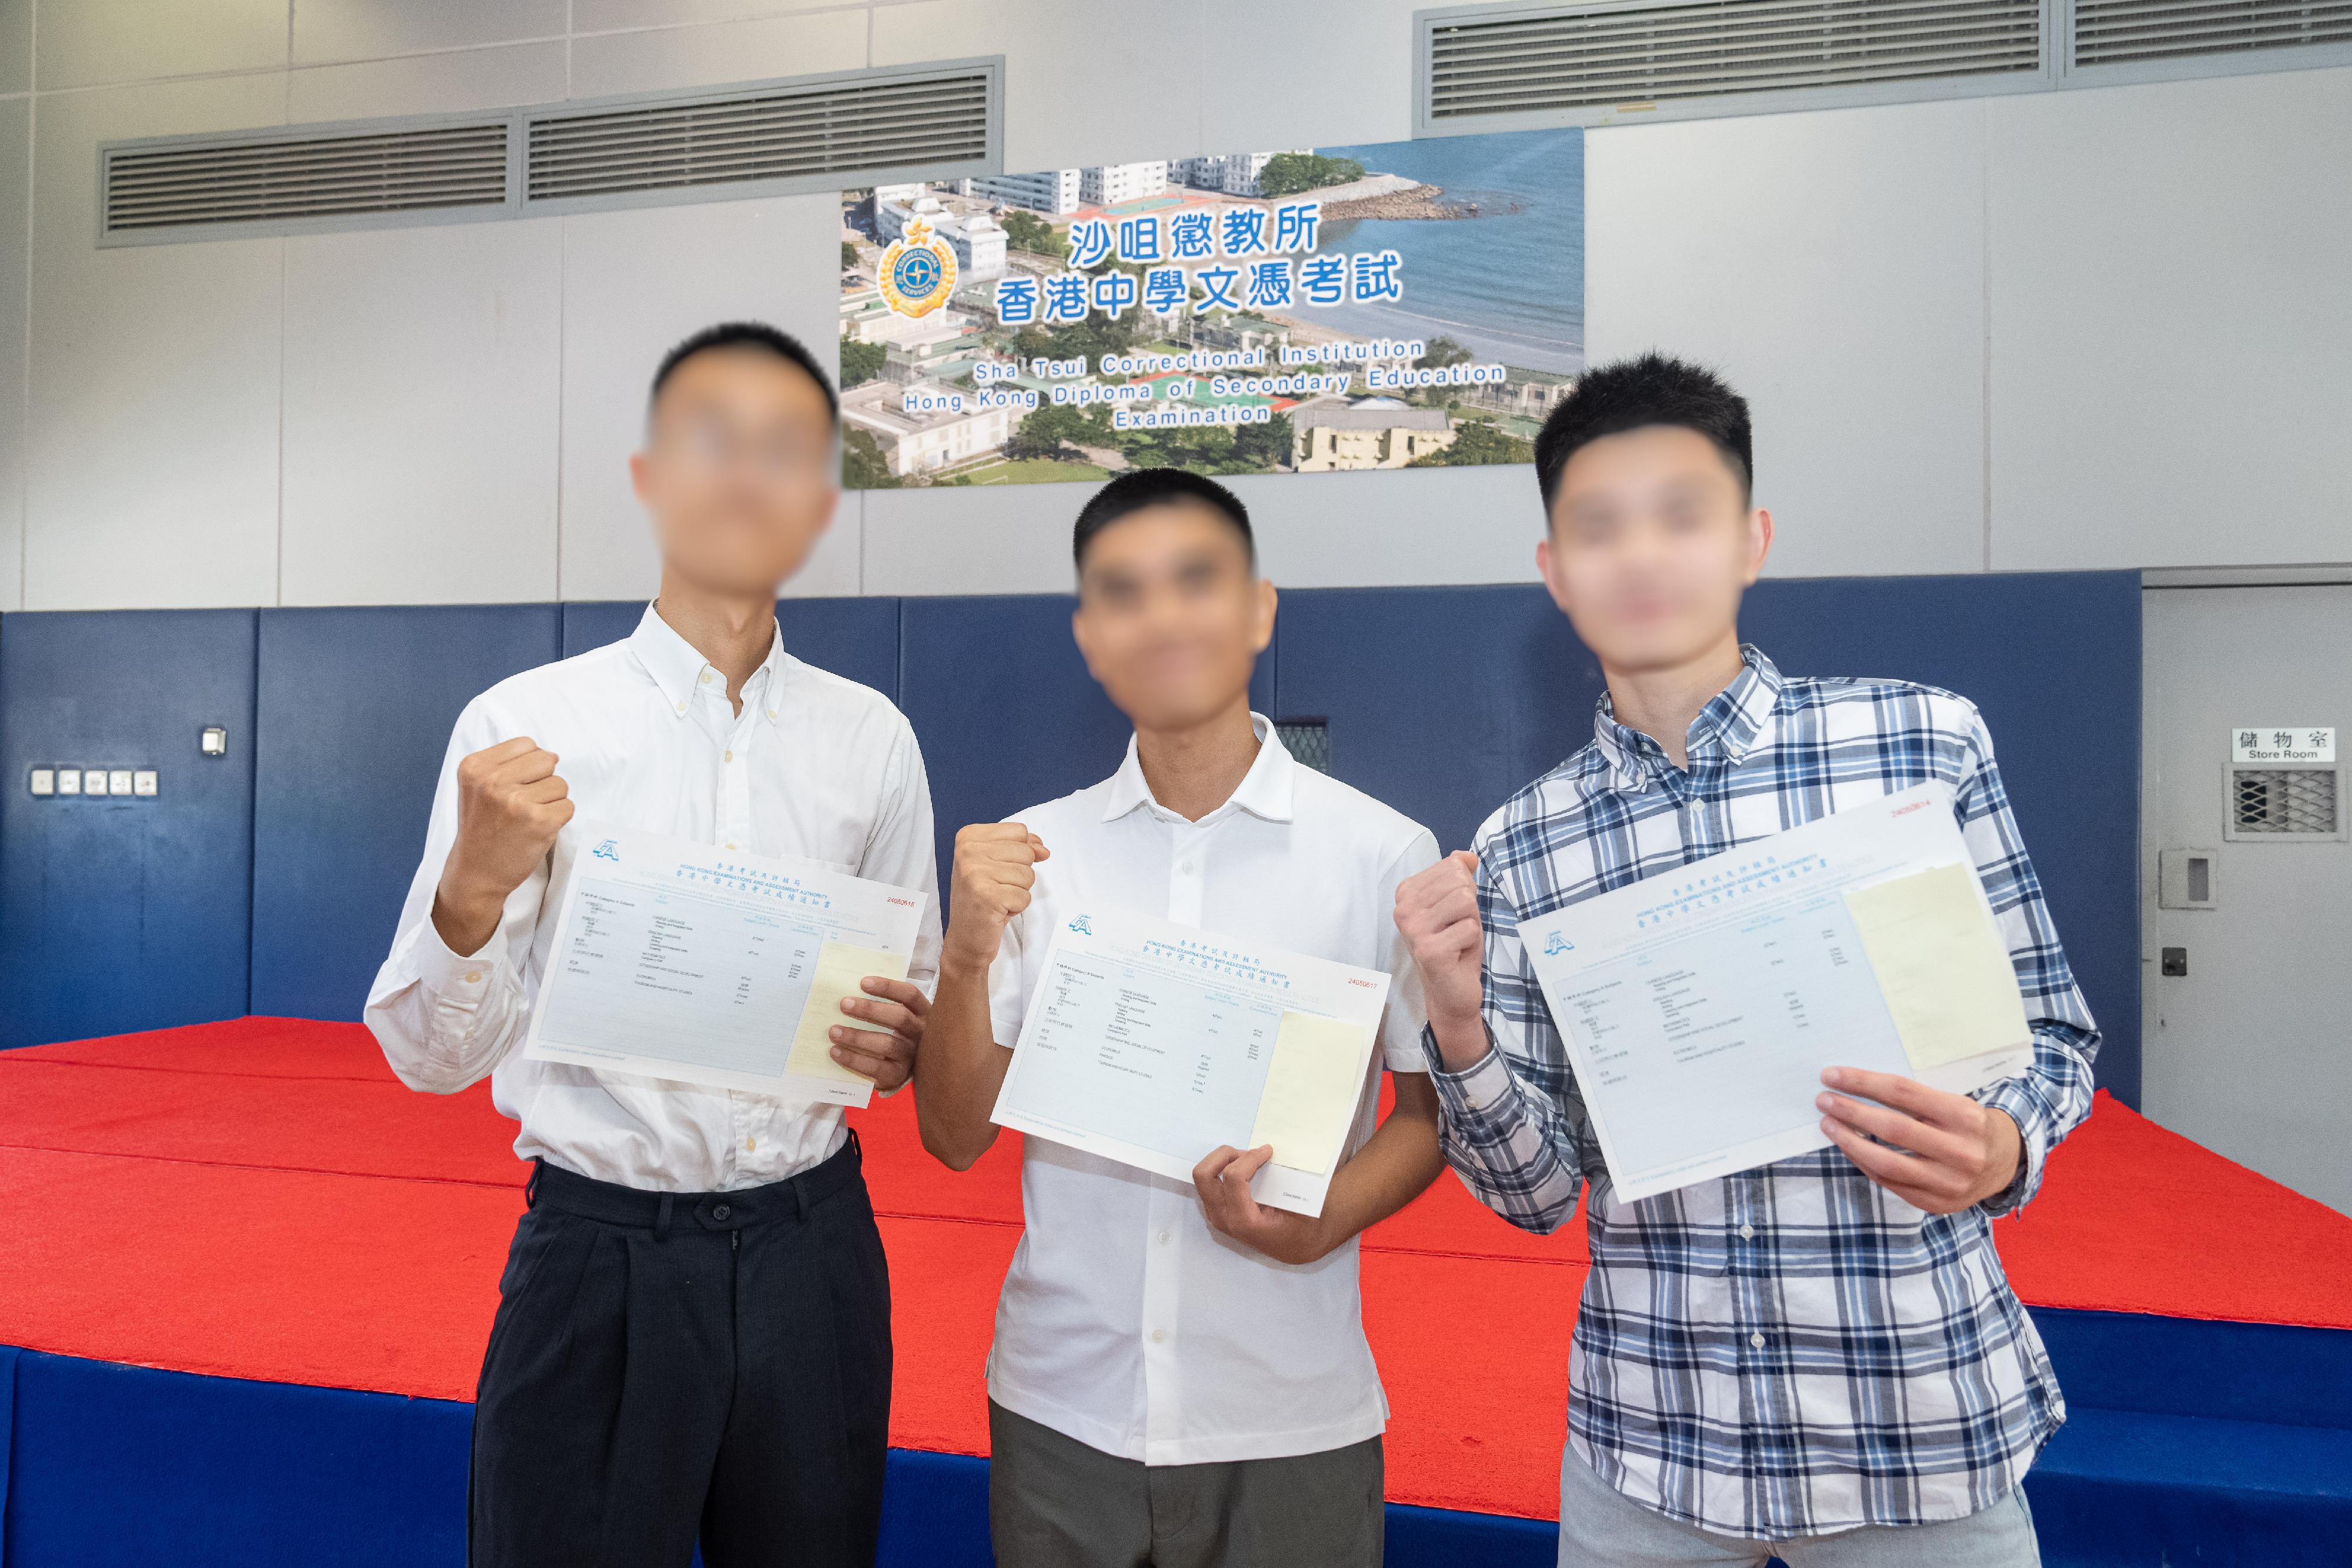 The results of the Hong Kong Diploma of Secondary Education Examination were released today (July 17). Fourteen young persons in custody enrolled in the examination this year. Photo shows rehabilitated persons showing their examination certificates.